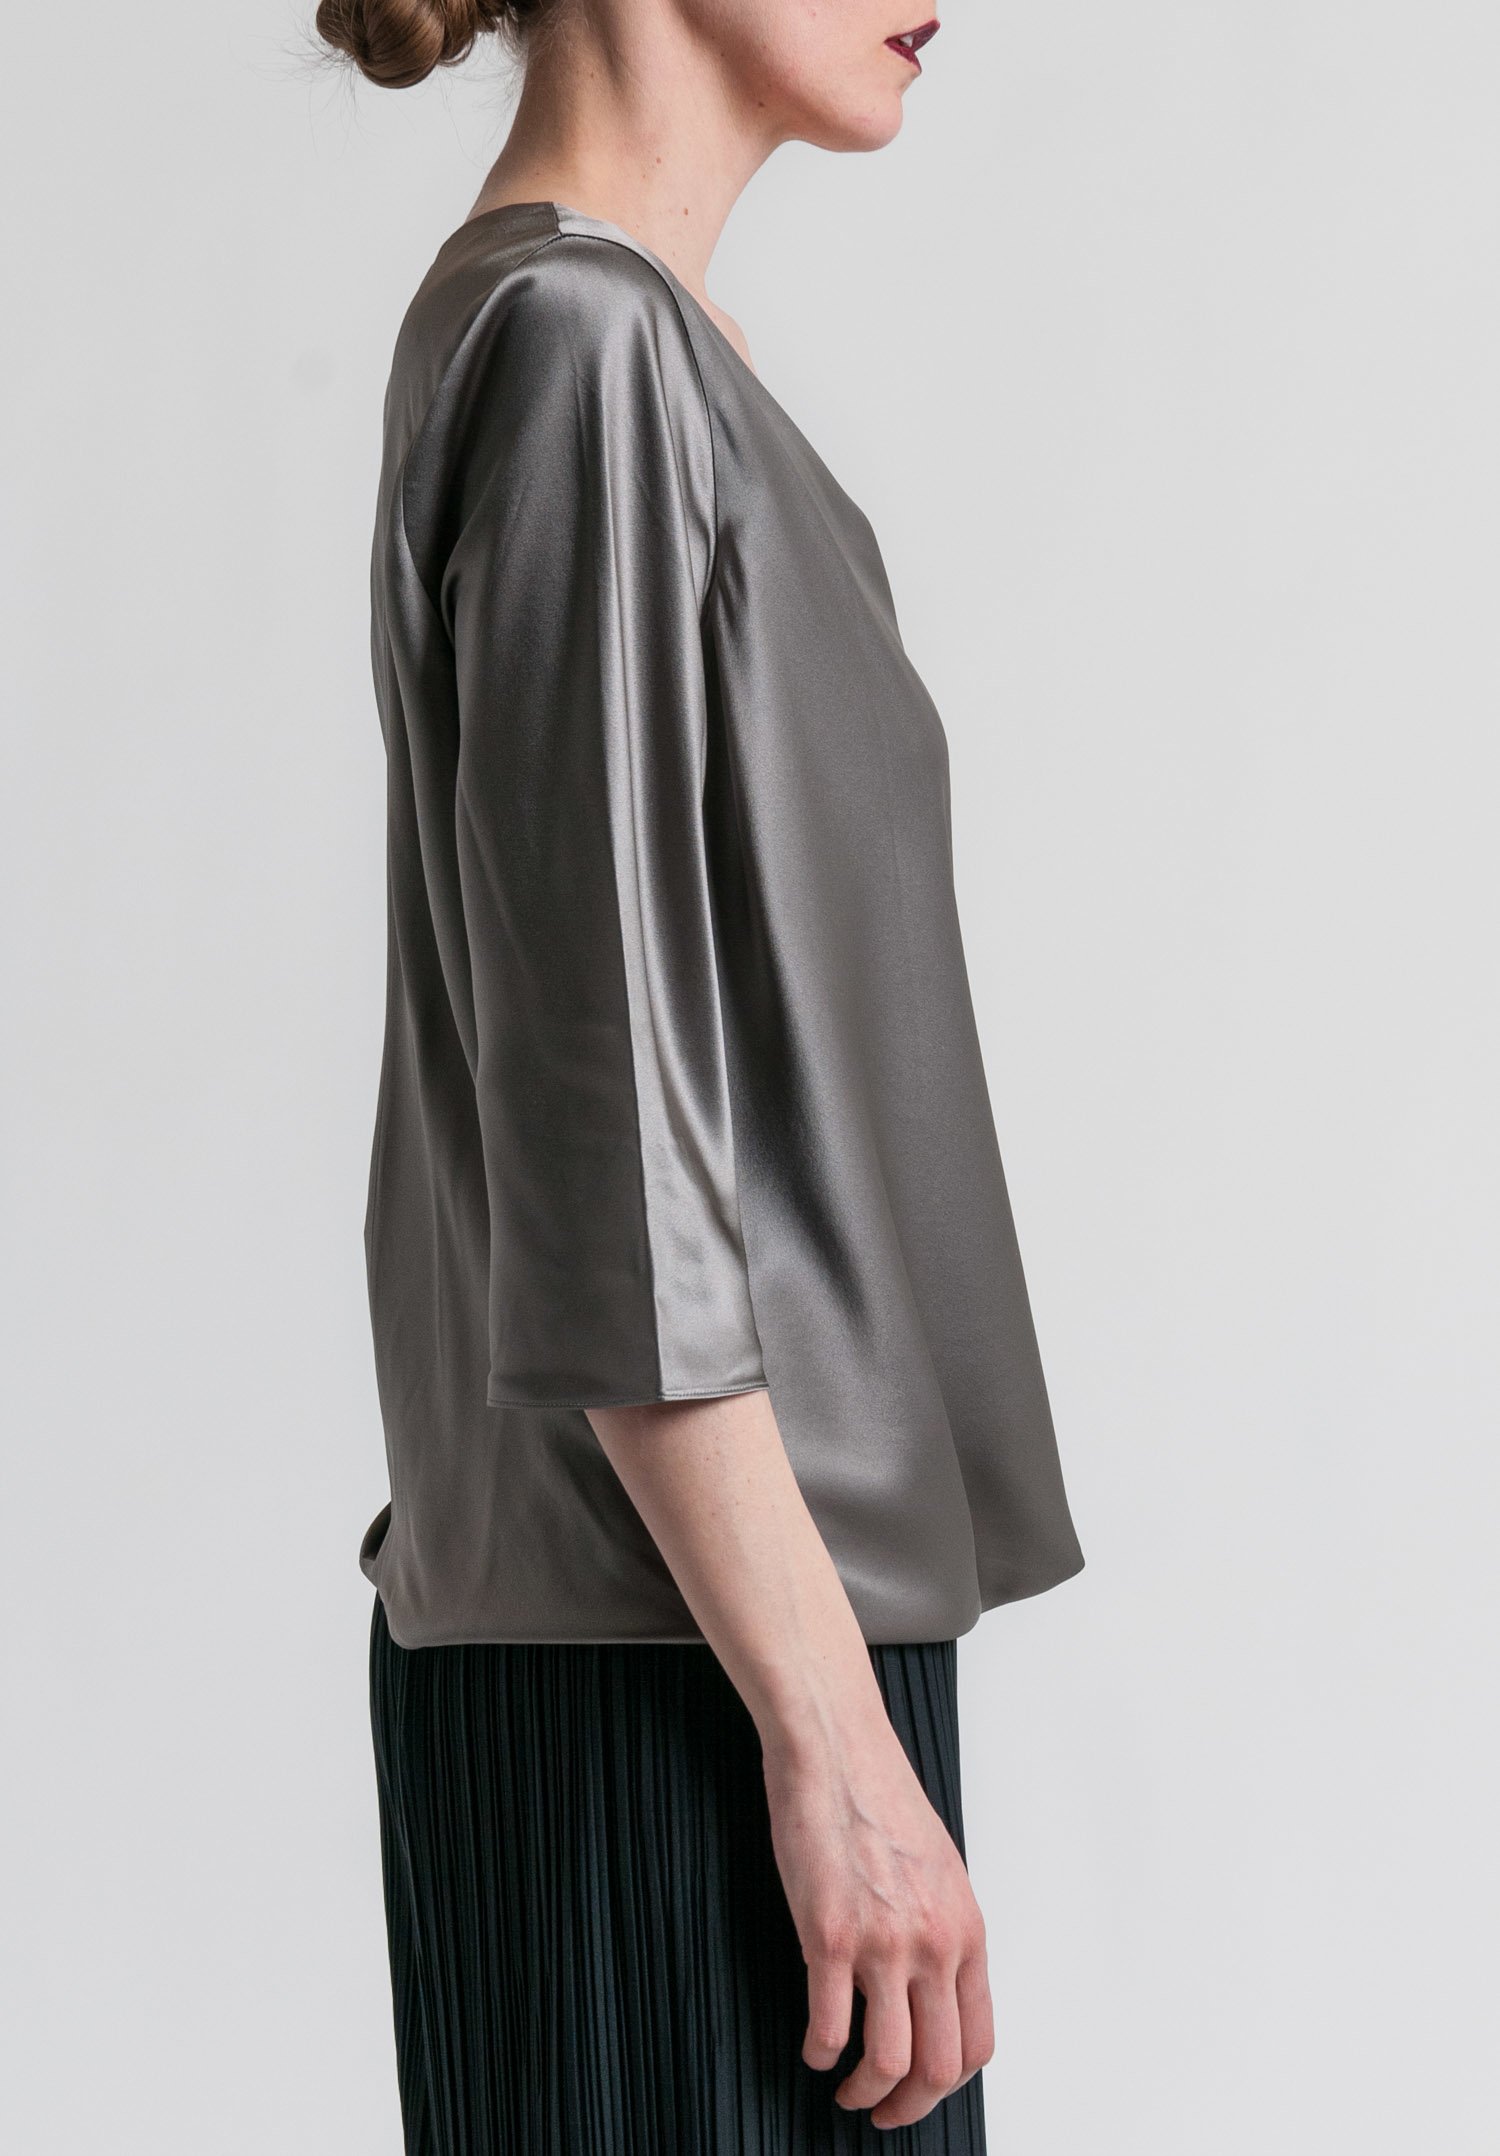 Peter Cohen 2-Layer Satin Drape Front Top in Pewter | Santa Fe Dry